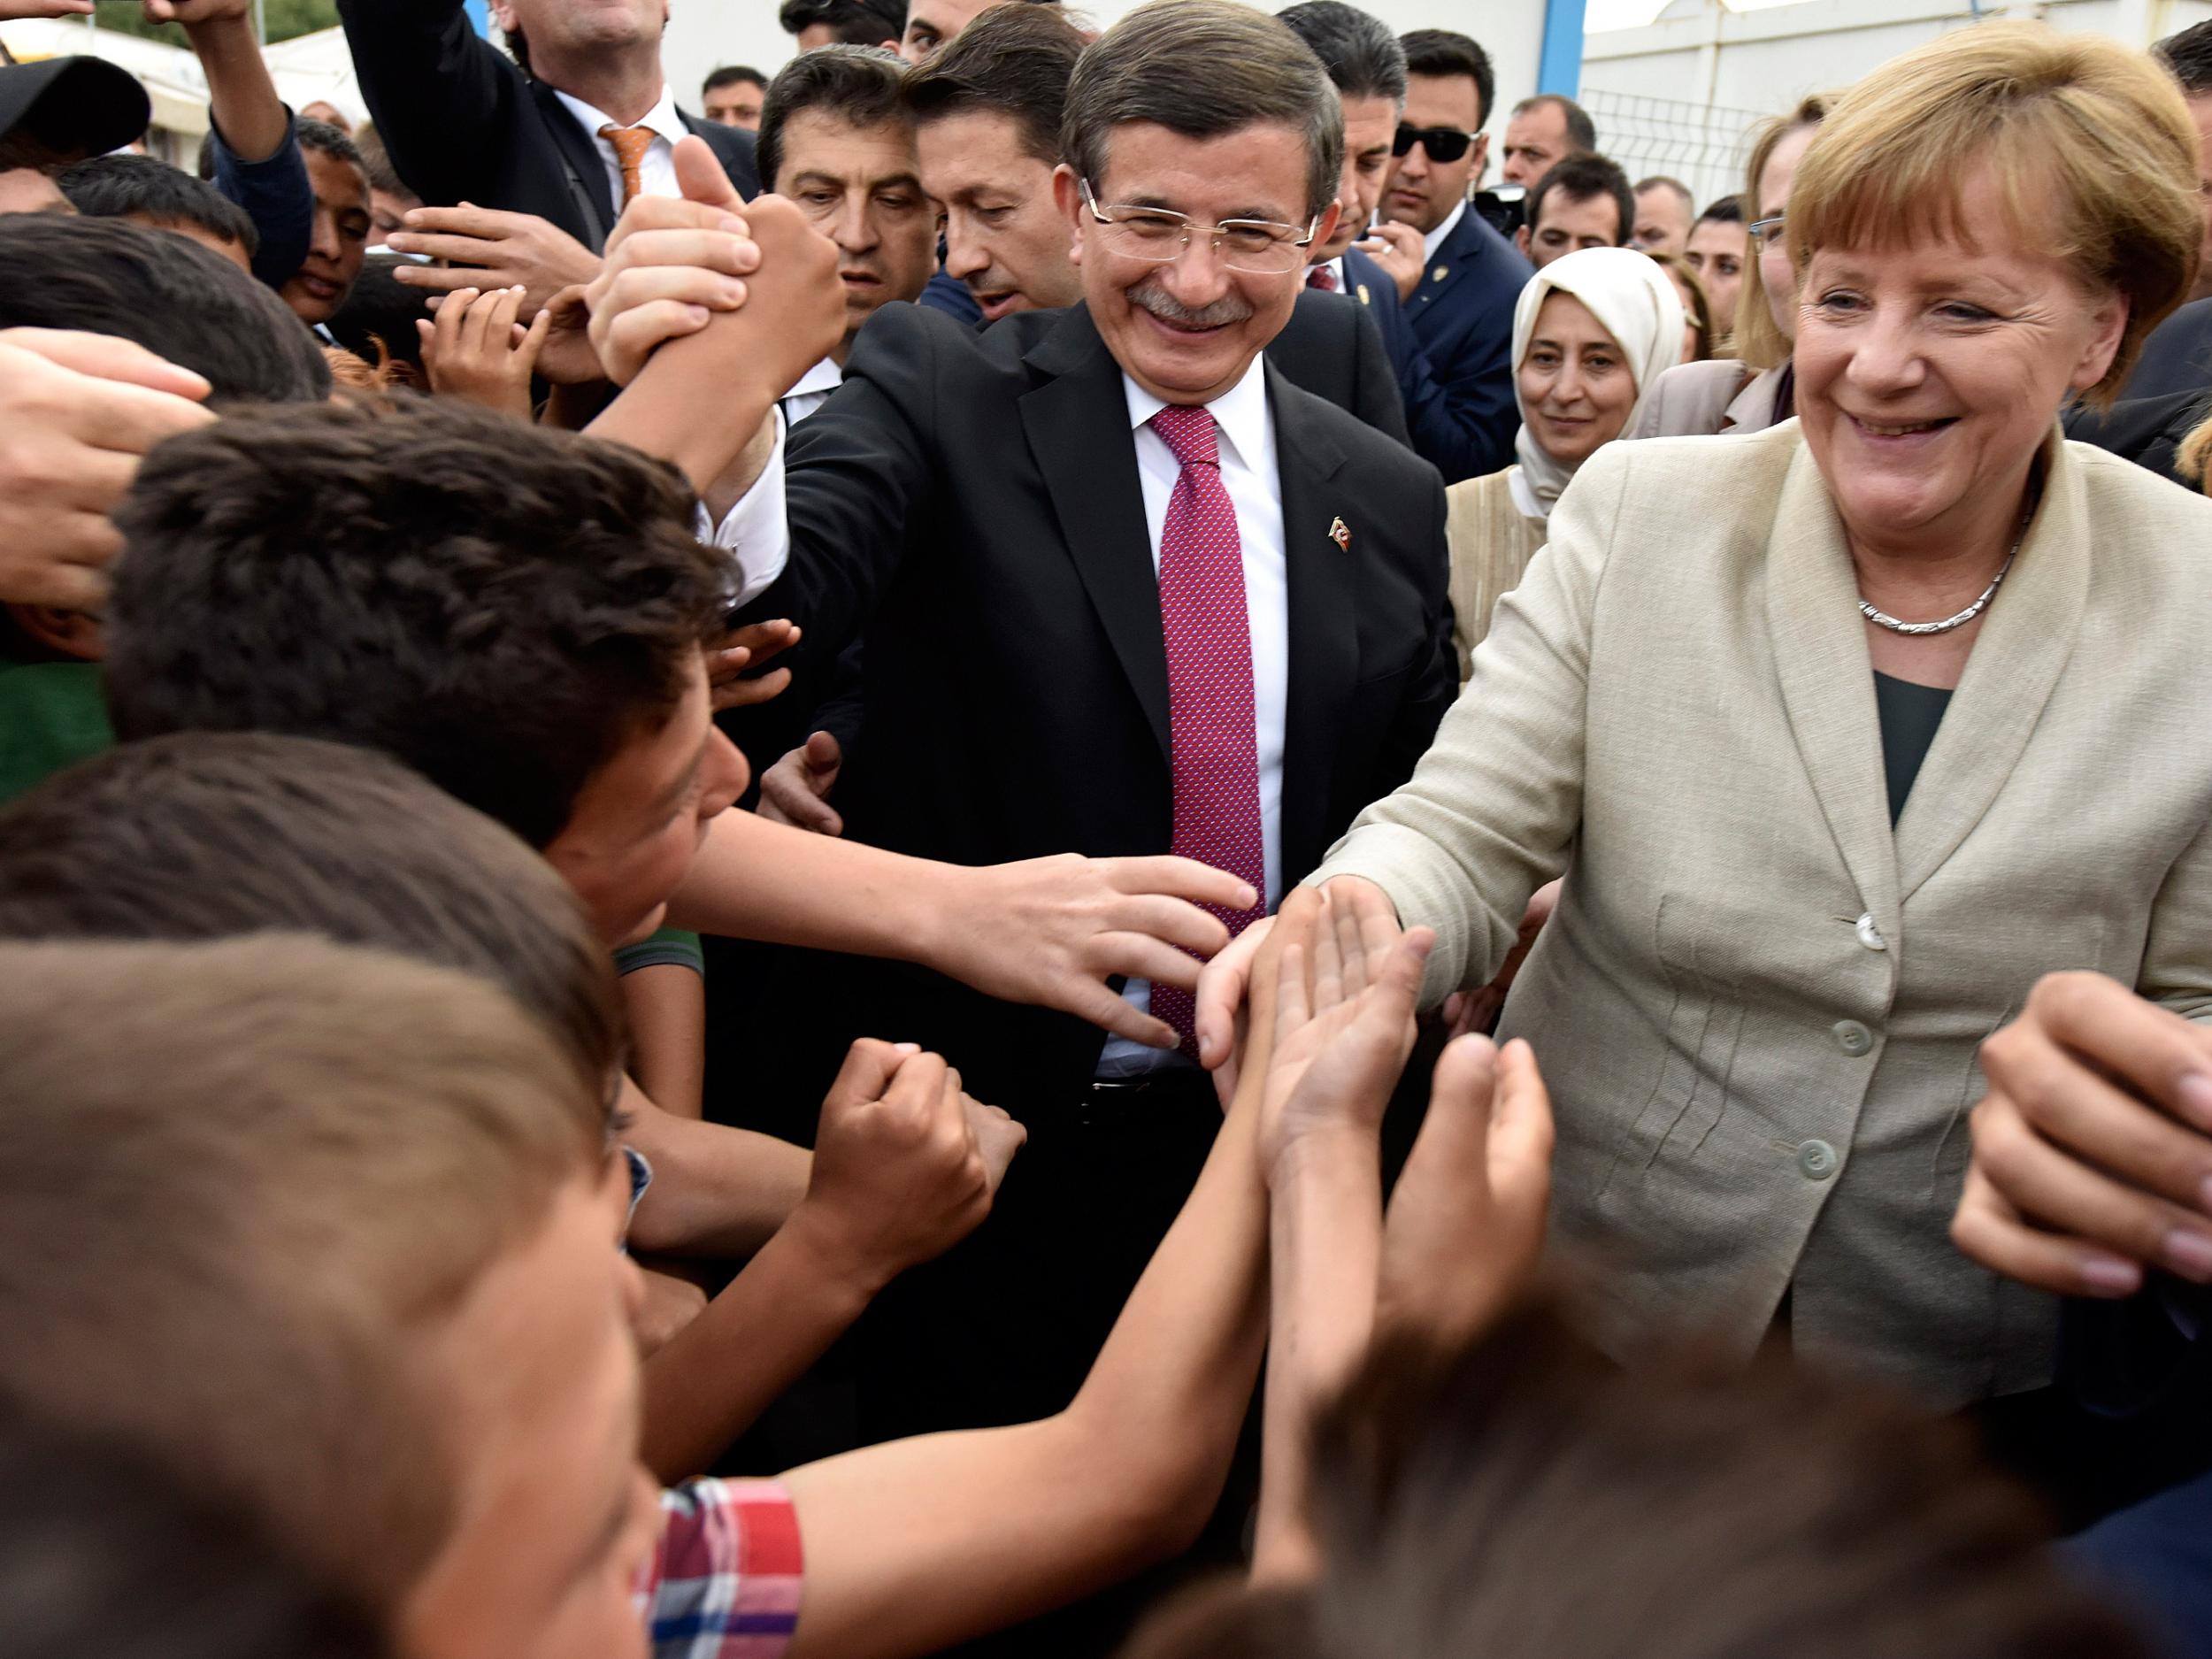 Turkey's Prime Minister, Ahmet Davutoglu and German Chancellor Angela Merkel greet people at a refugee camp on April 23, 2016 in Gaziantep, Turkey (Getty Images)